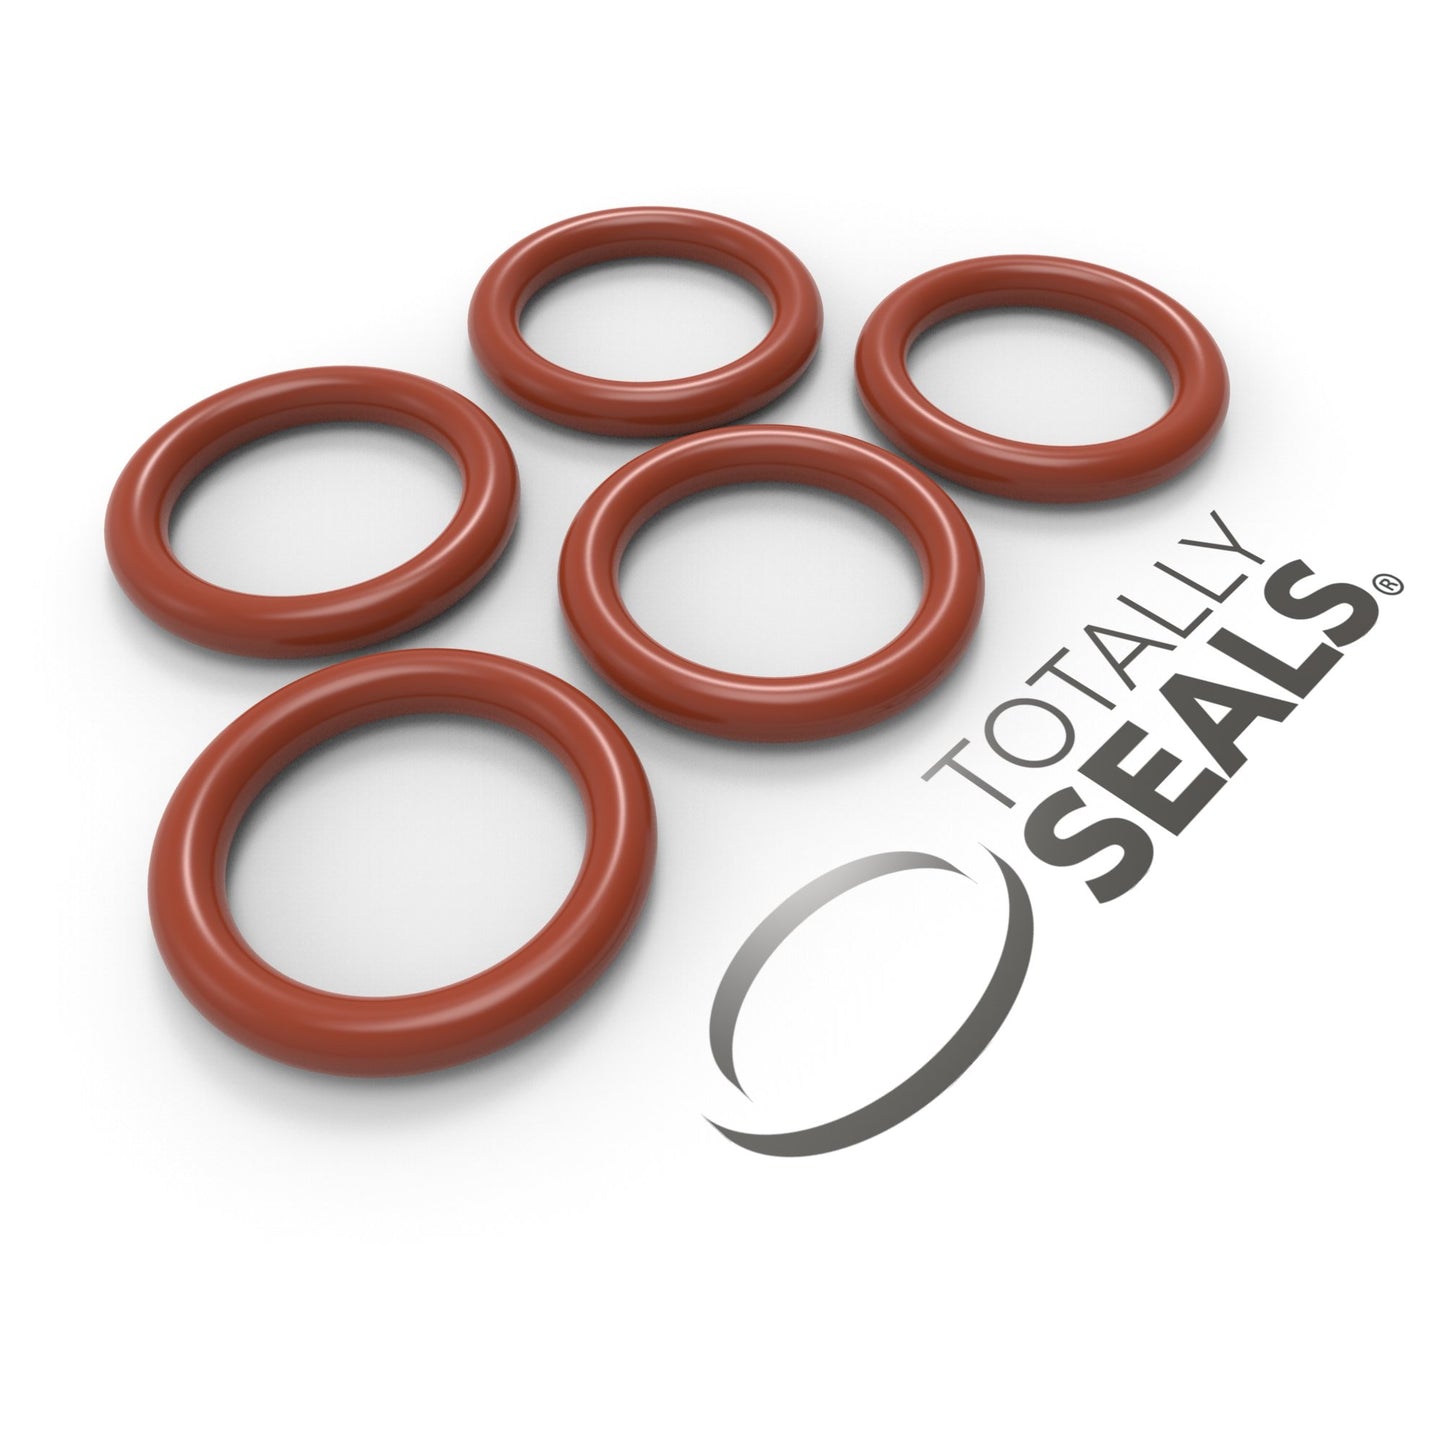 20mm x 2.5mm (25mm OD) Silicone O-Rings - Totally Seals®